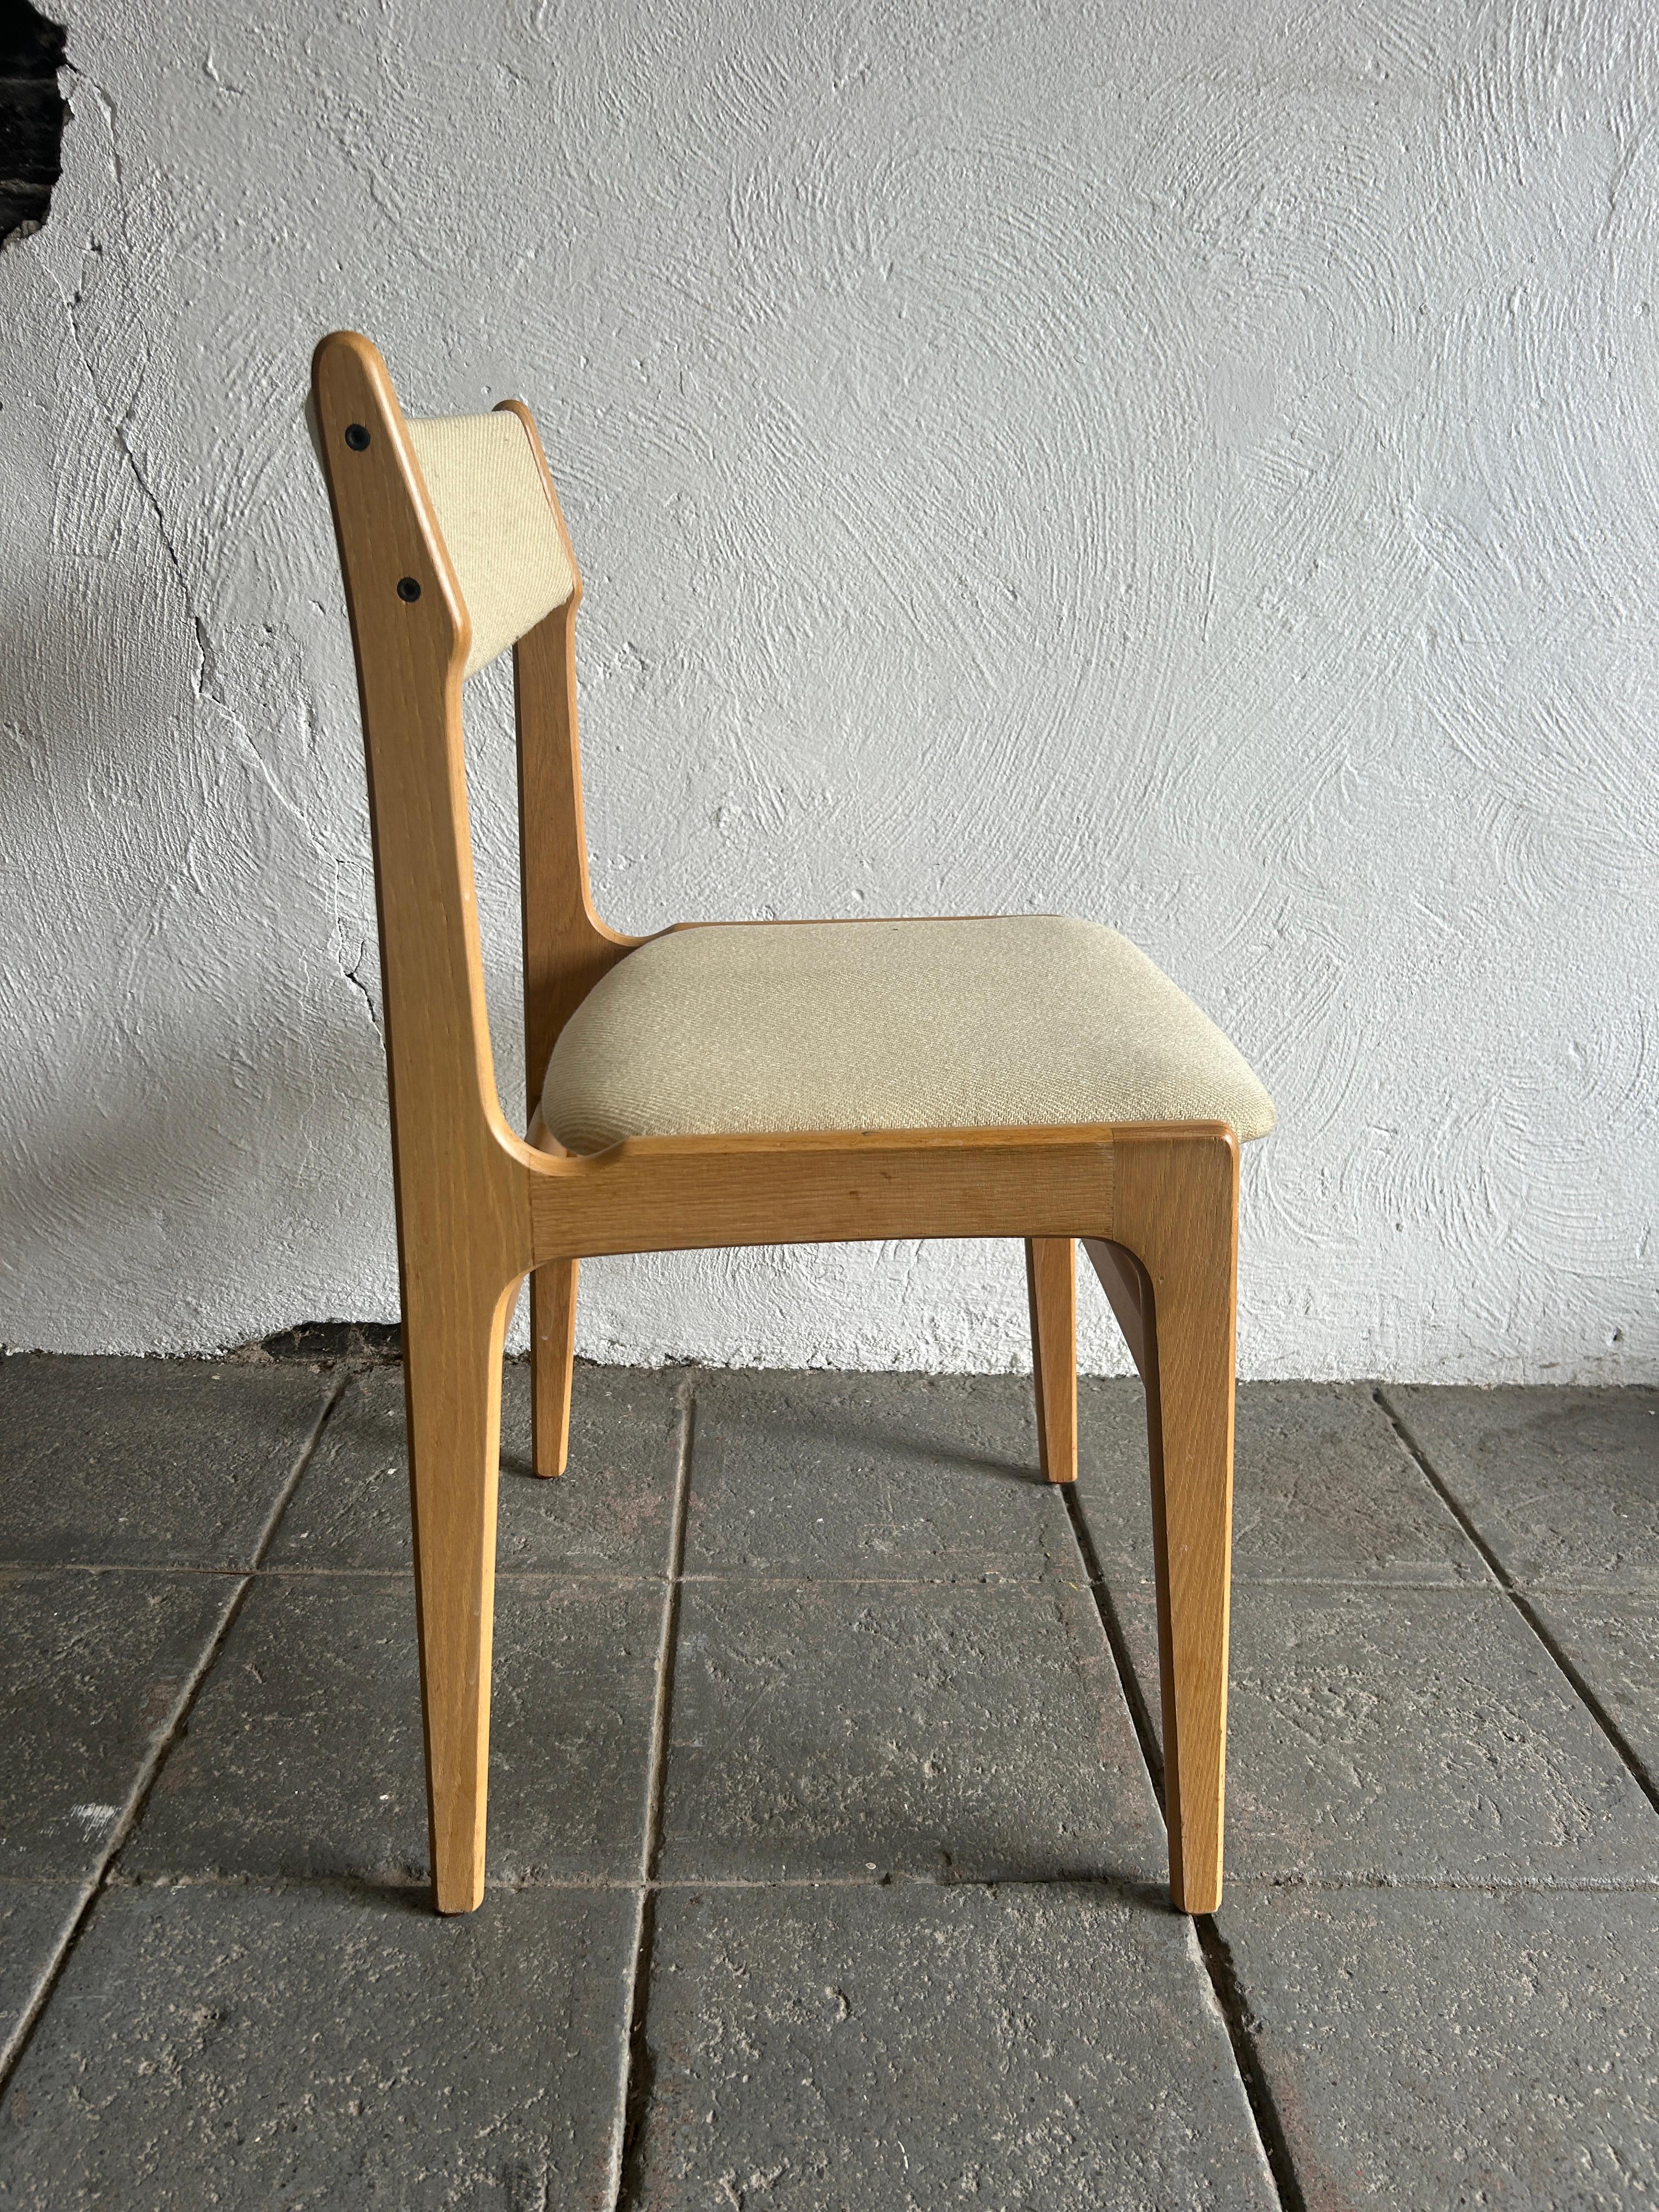 6 Scandinavian modern white oak dining chairs tan upholstery  In Good Condition For Sale In BROOKLYN, NY